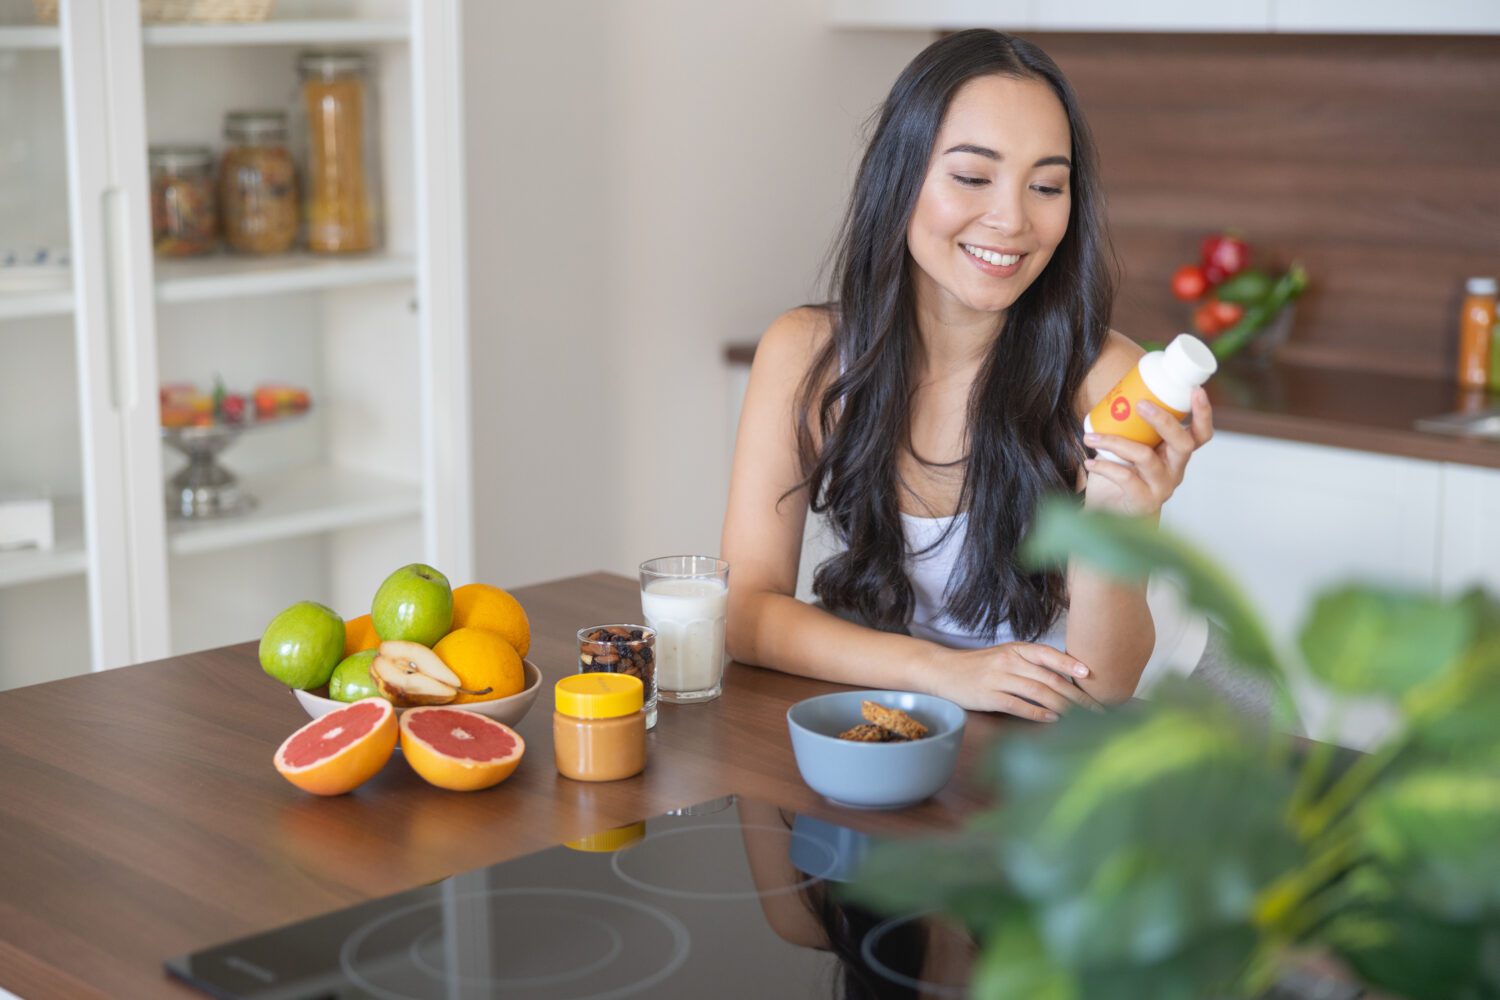 Young woman taking a nutritional supplement at breakfast